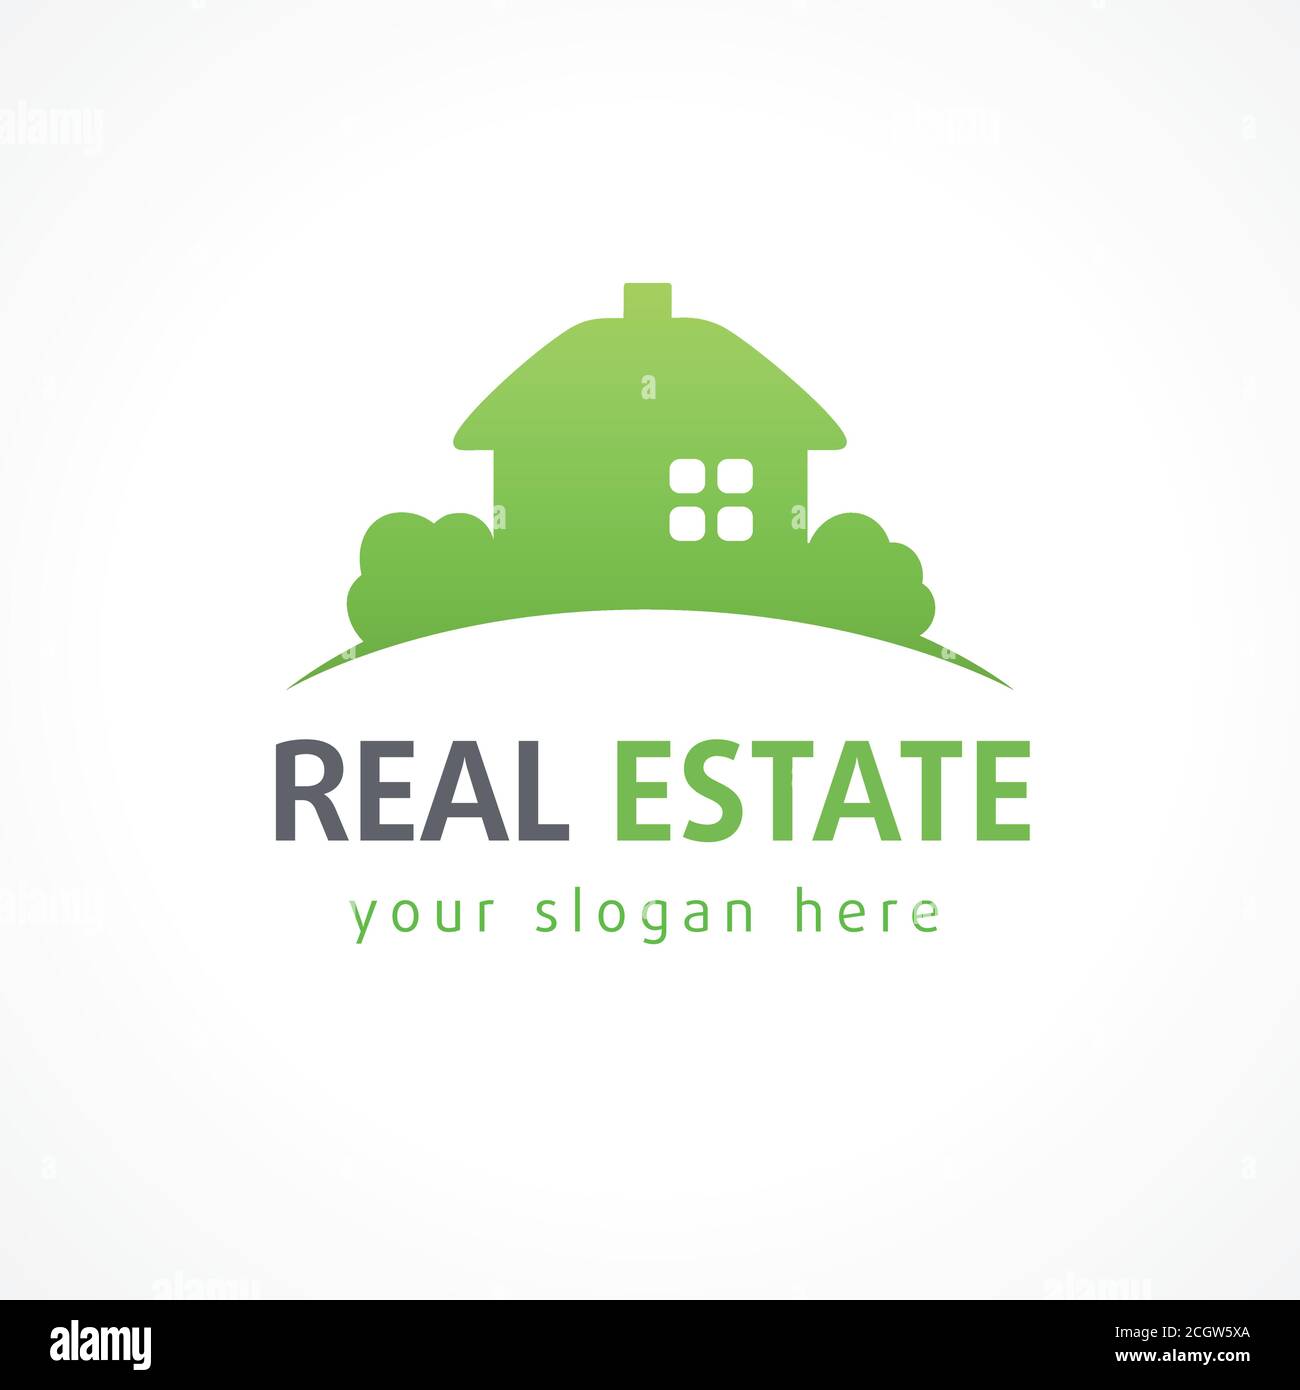 Real estate vector logo. House for sale sign. Icon for own property agency, invest or landscaping business. Country house vintage isolated symbol. Stock Vector